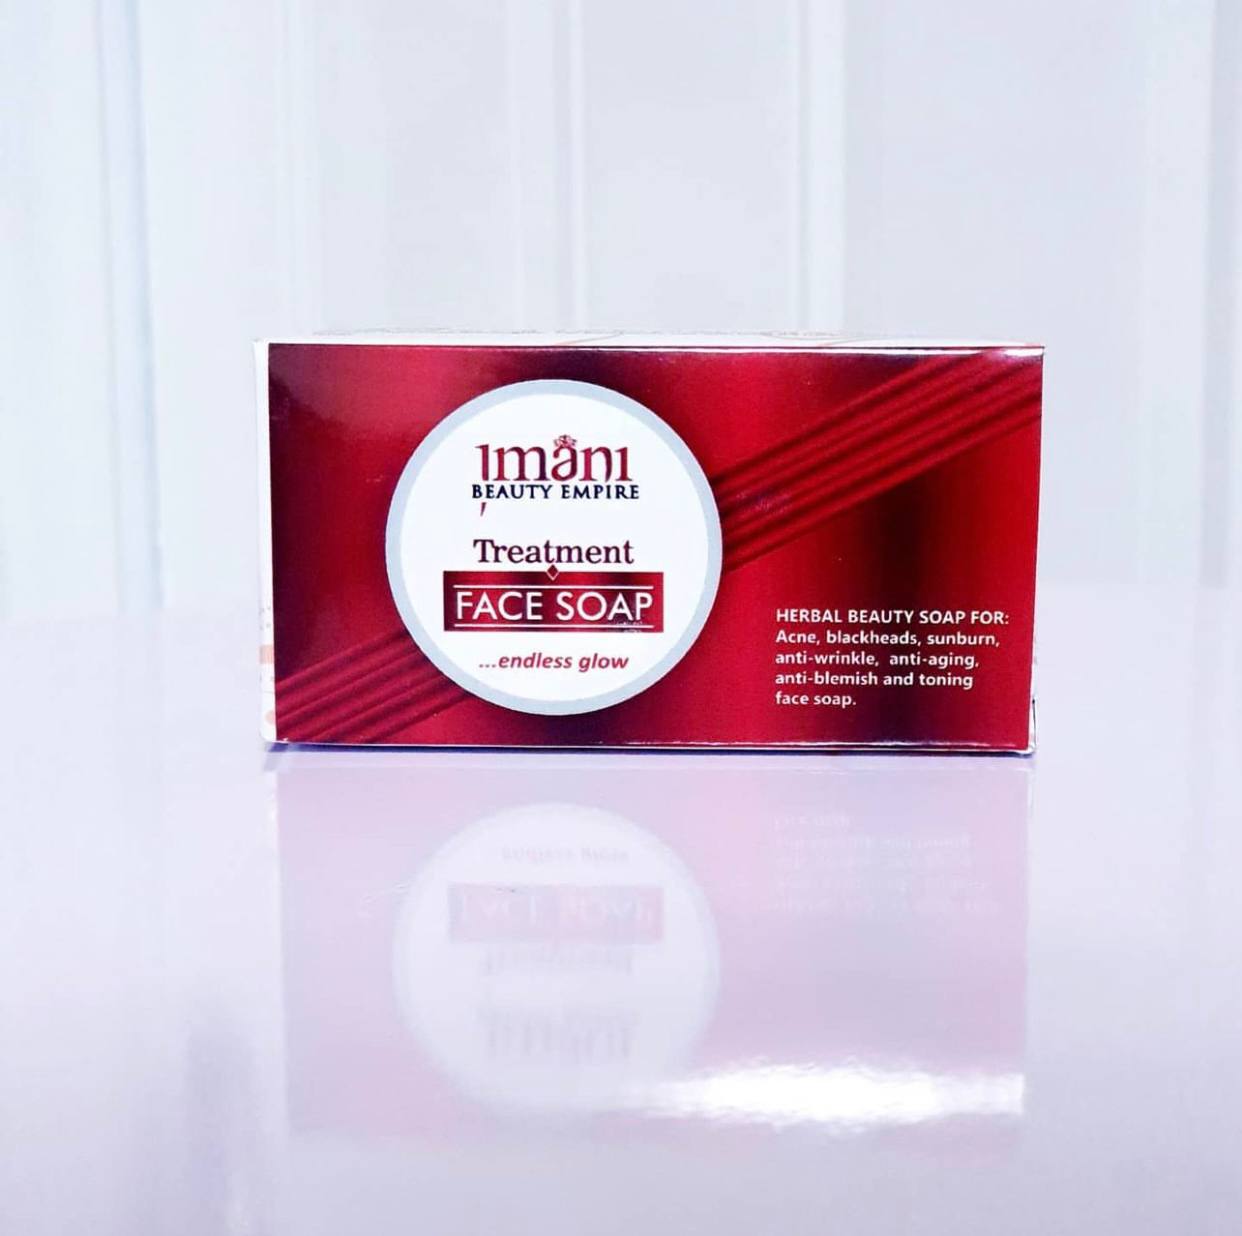 Buy Acne Away Face Body Bar Online. Enjoy safe shopping online with our ecommerce. ✓ Best Price in Nigeria ✓ Fast Delivery & Express delivery Available. Also available at the Lagos and Abuja offices of Imani Aesthetic and Laser Clinic